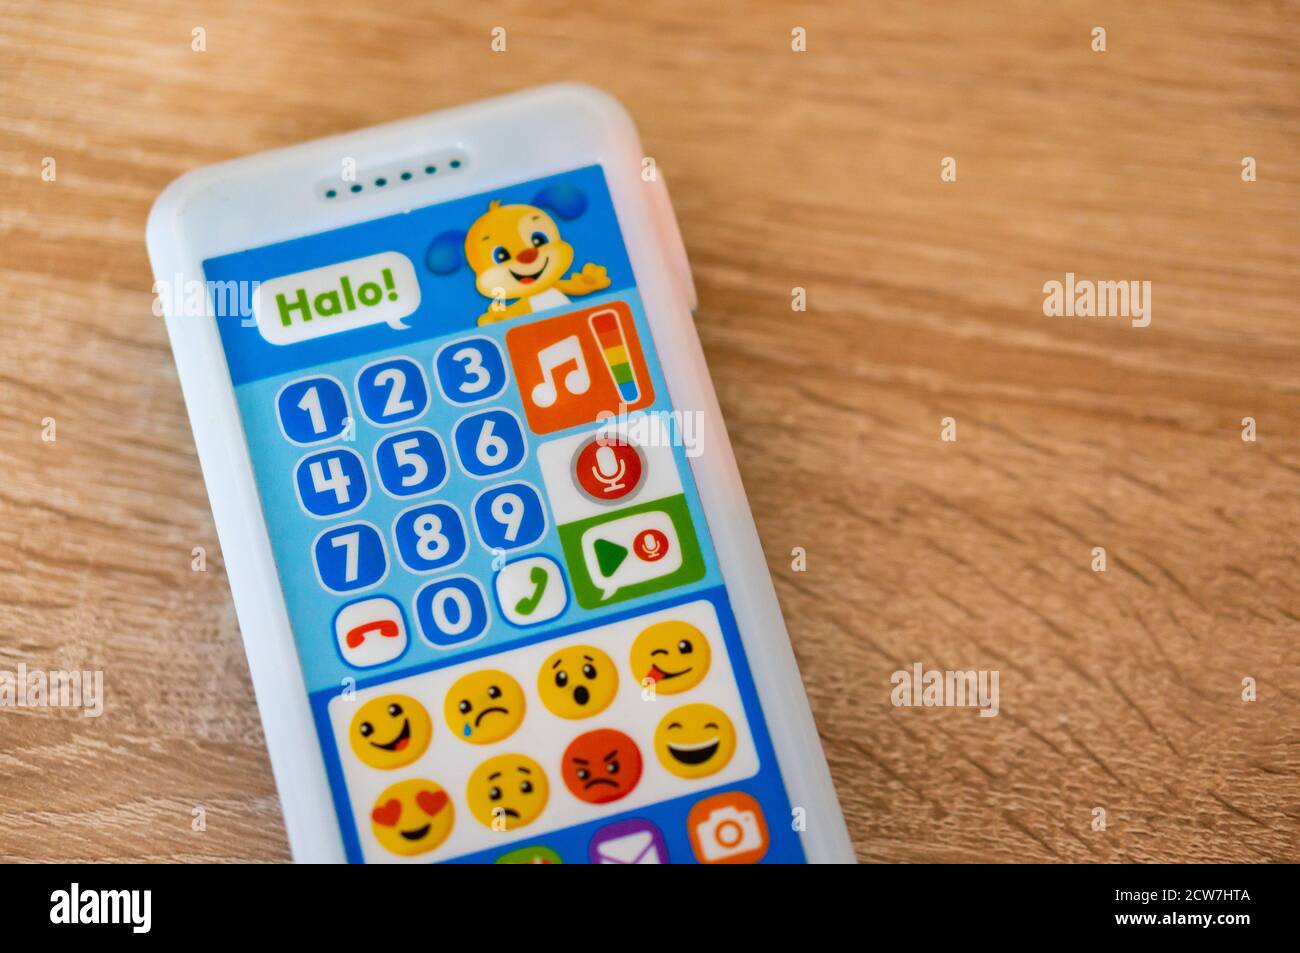 POZNAN, POLAND - Sep 12, 2020: Fisher Price toy telephone with many buttons on a wooden surface Stock Photo